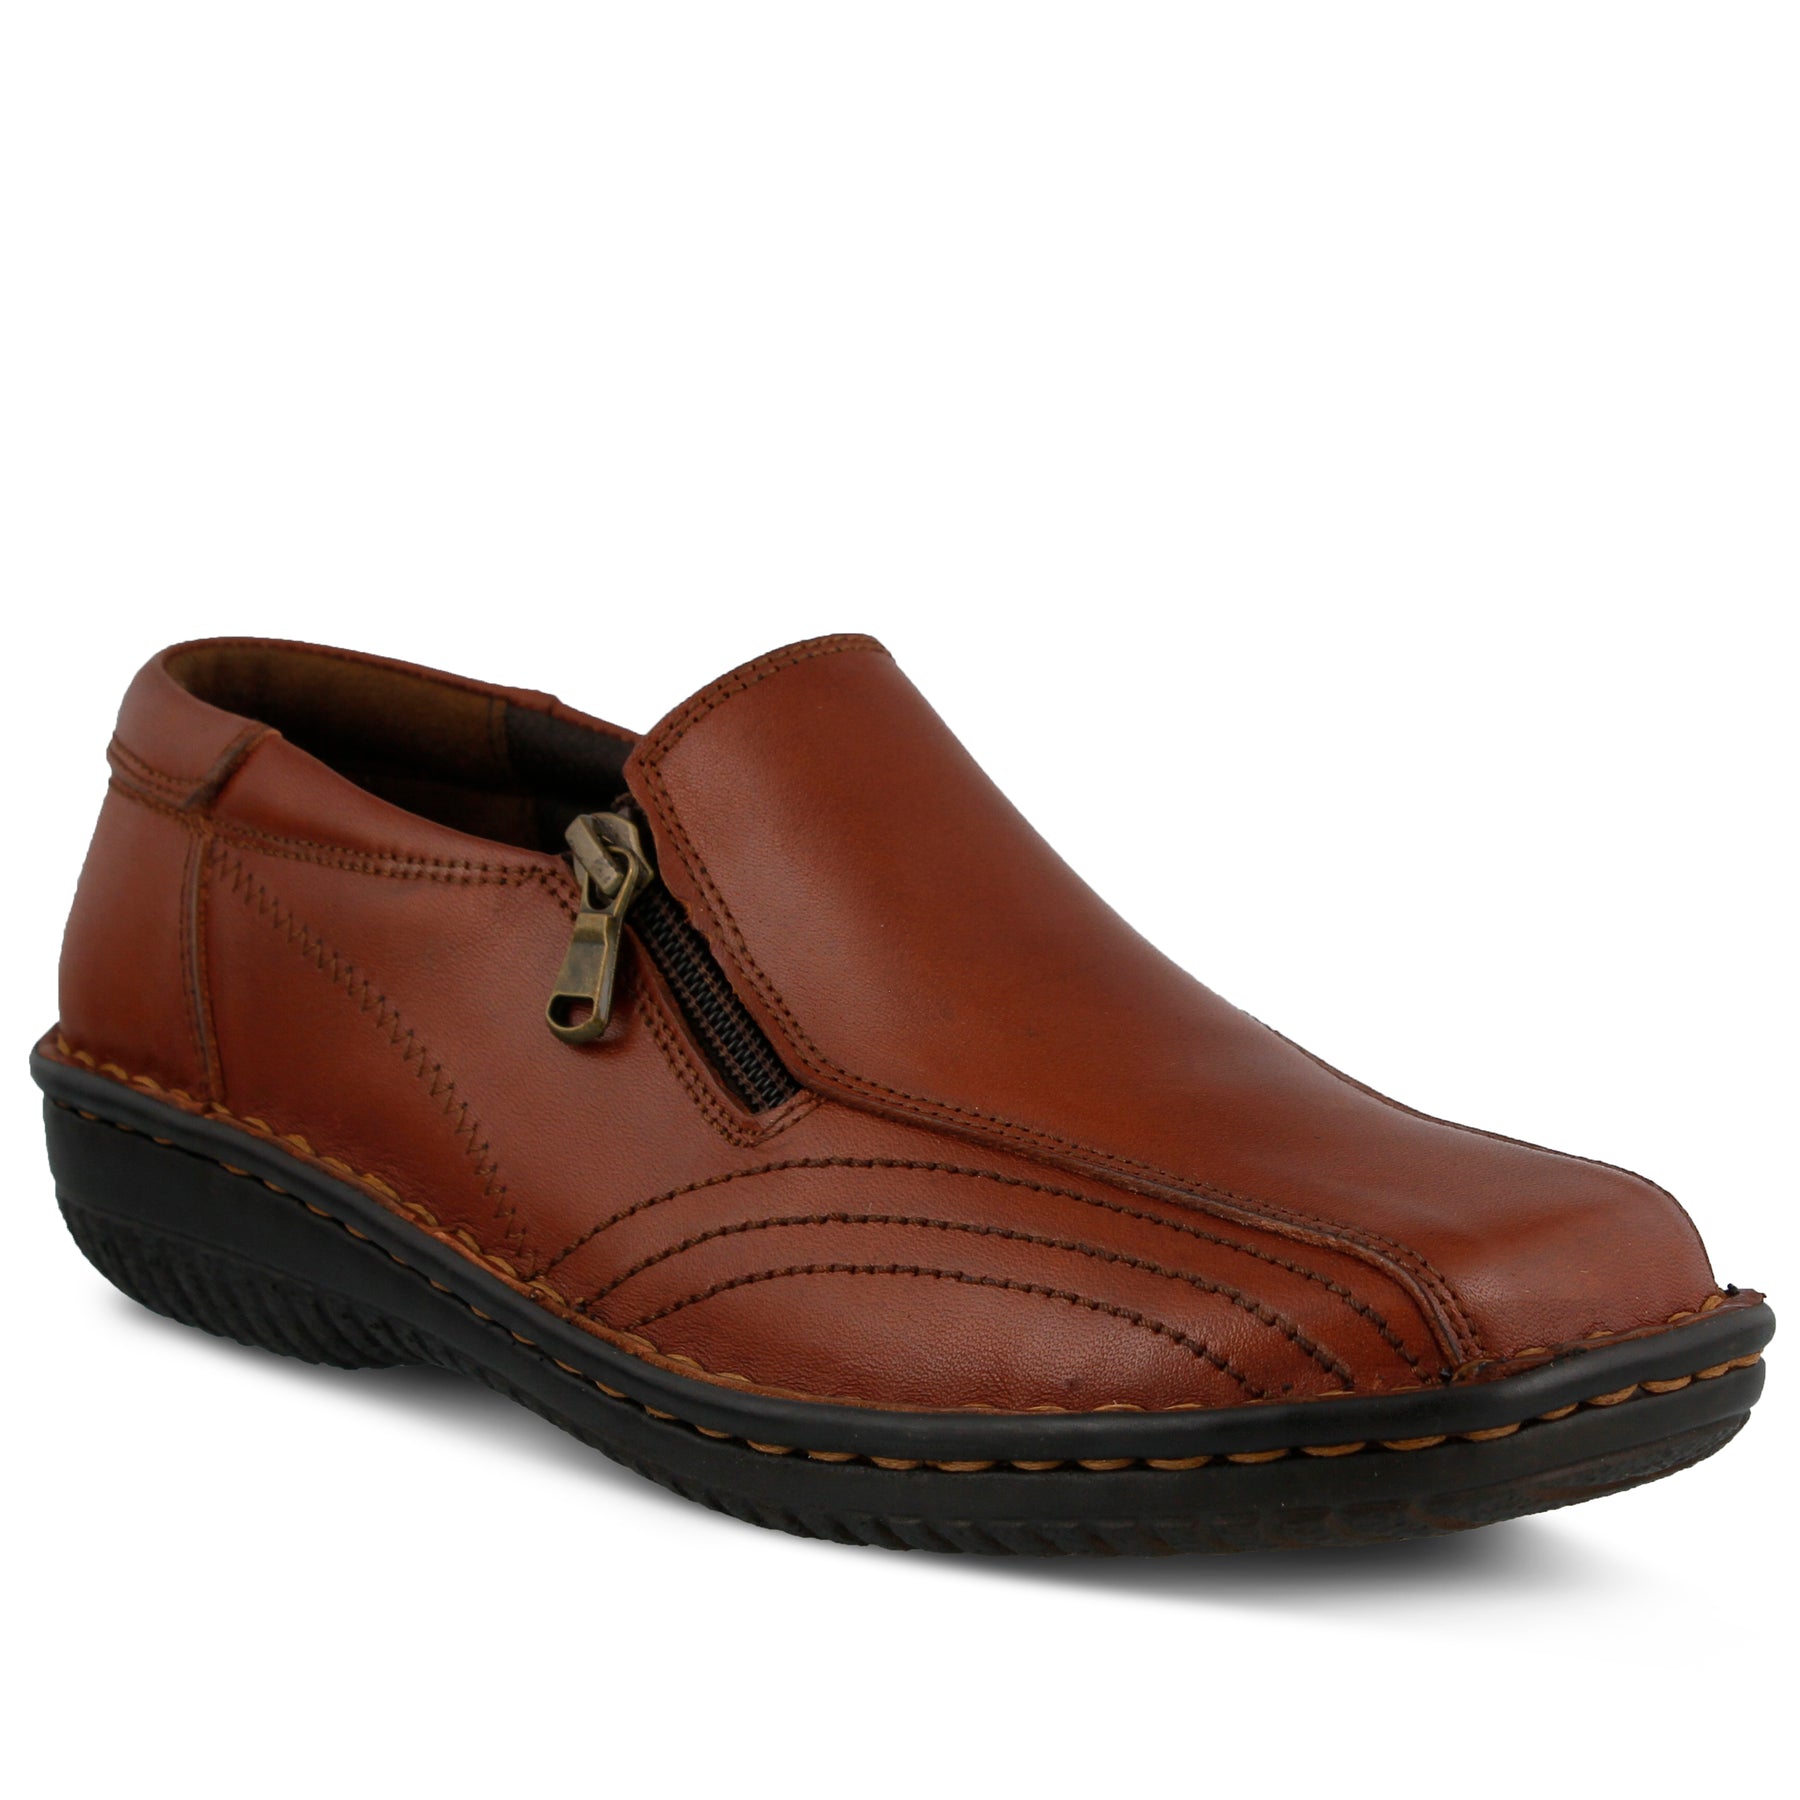 FLORIANO SLIP-ON SHOE by SPRING STEP 